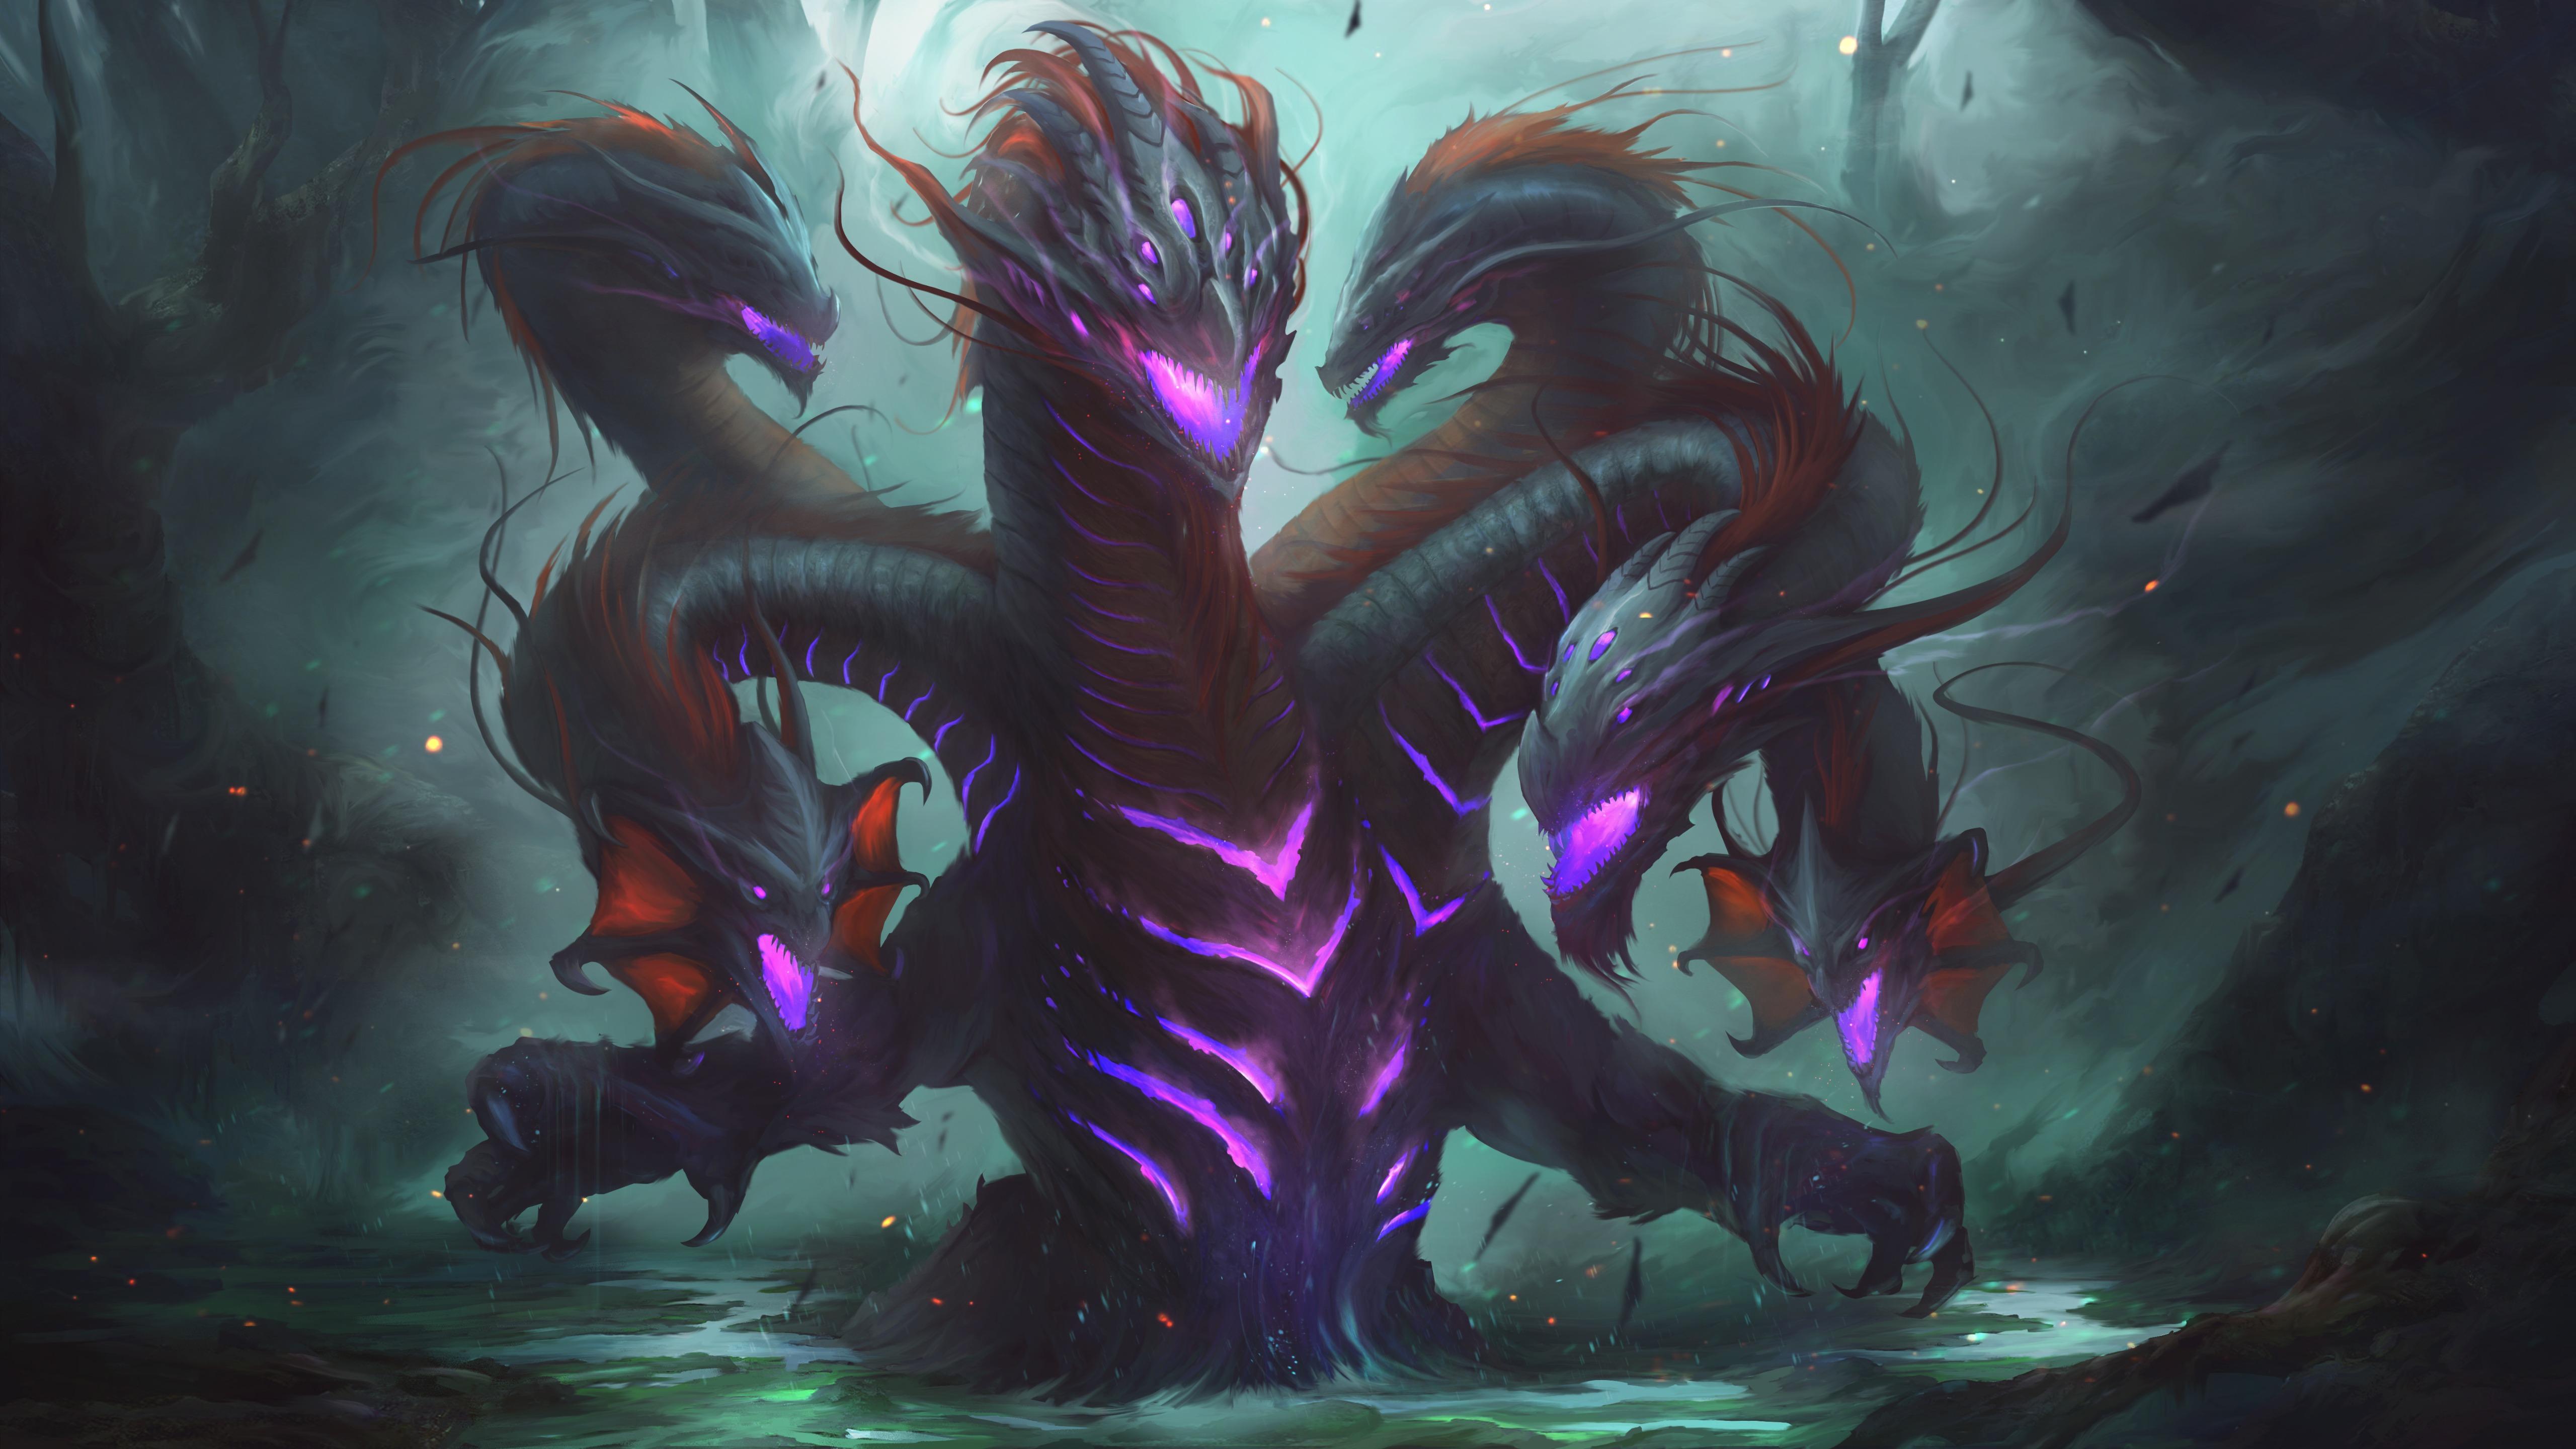 Colorful Monster Dragon Hydra: 4K Artwork Wallpaper - Free Download for PC